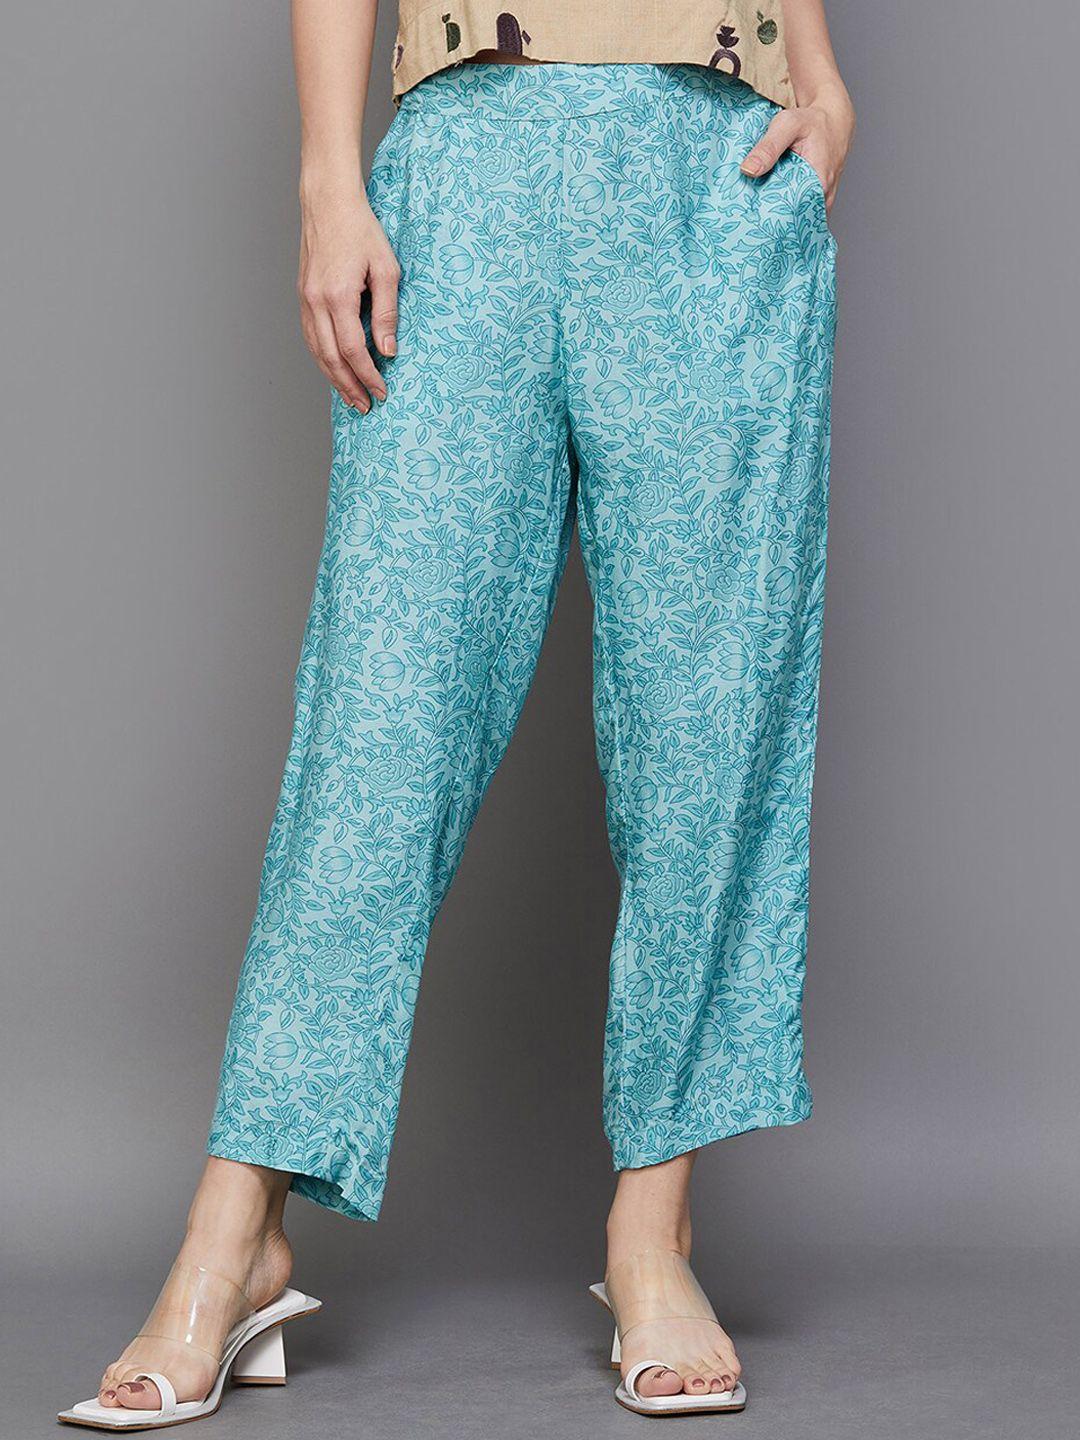 melange by lifestyle women mid-rise floral printed pleated trousers